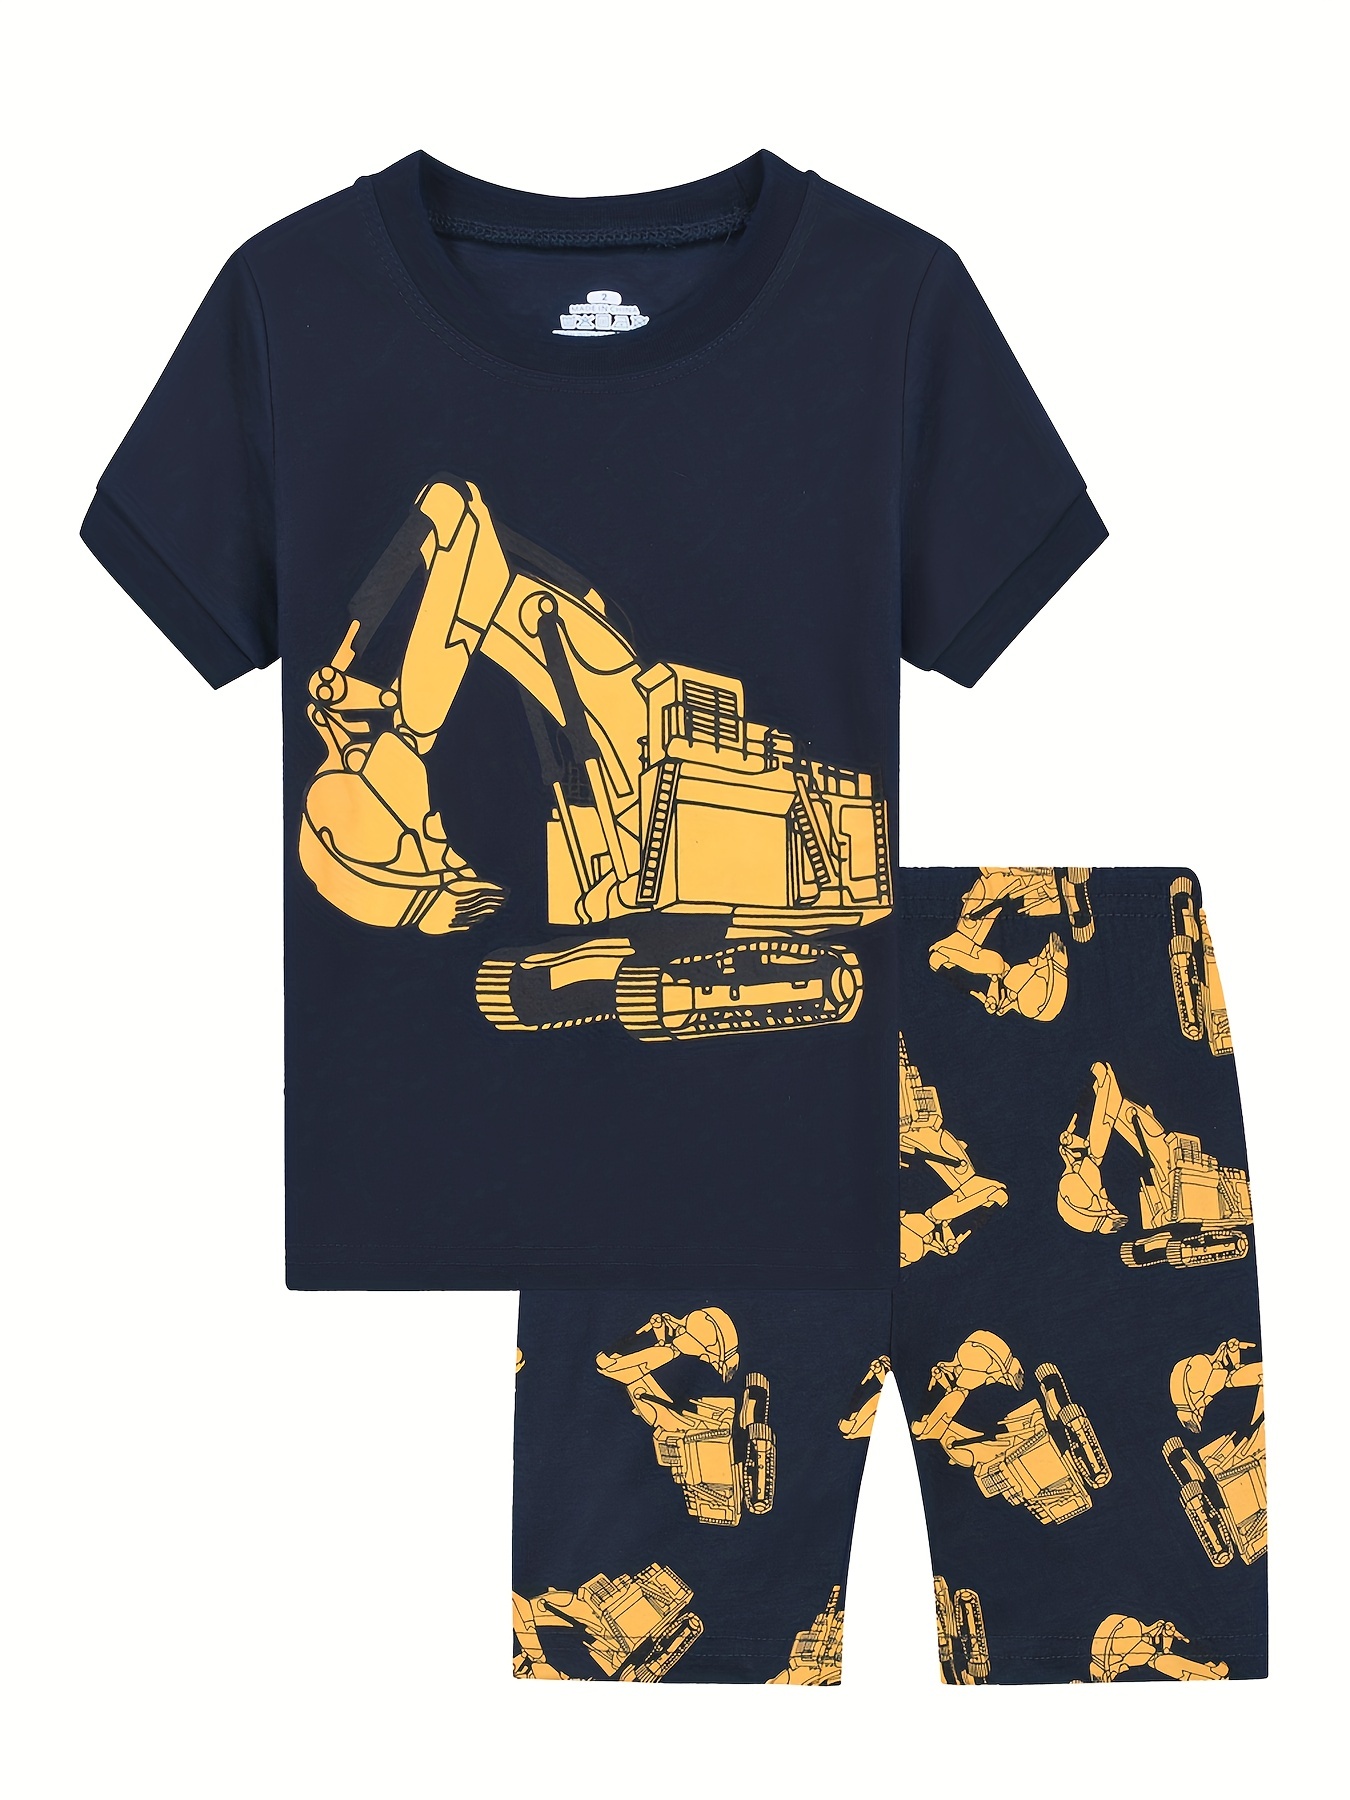 pajamasets.co best pajamas for kids,women and men